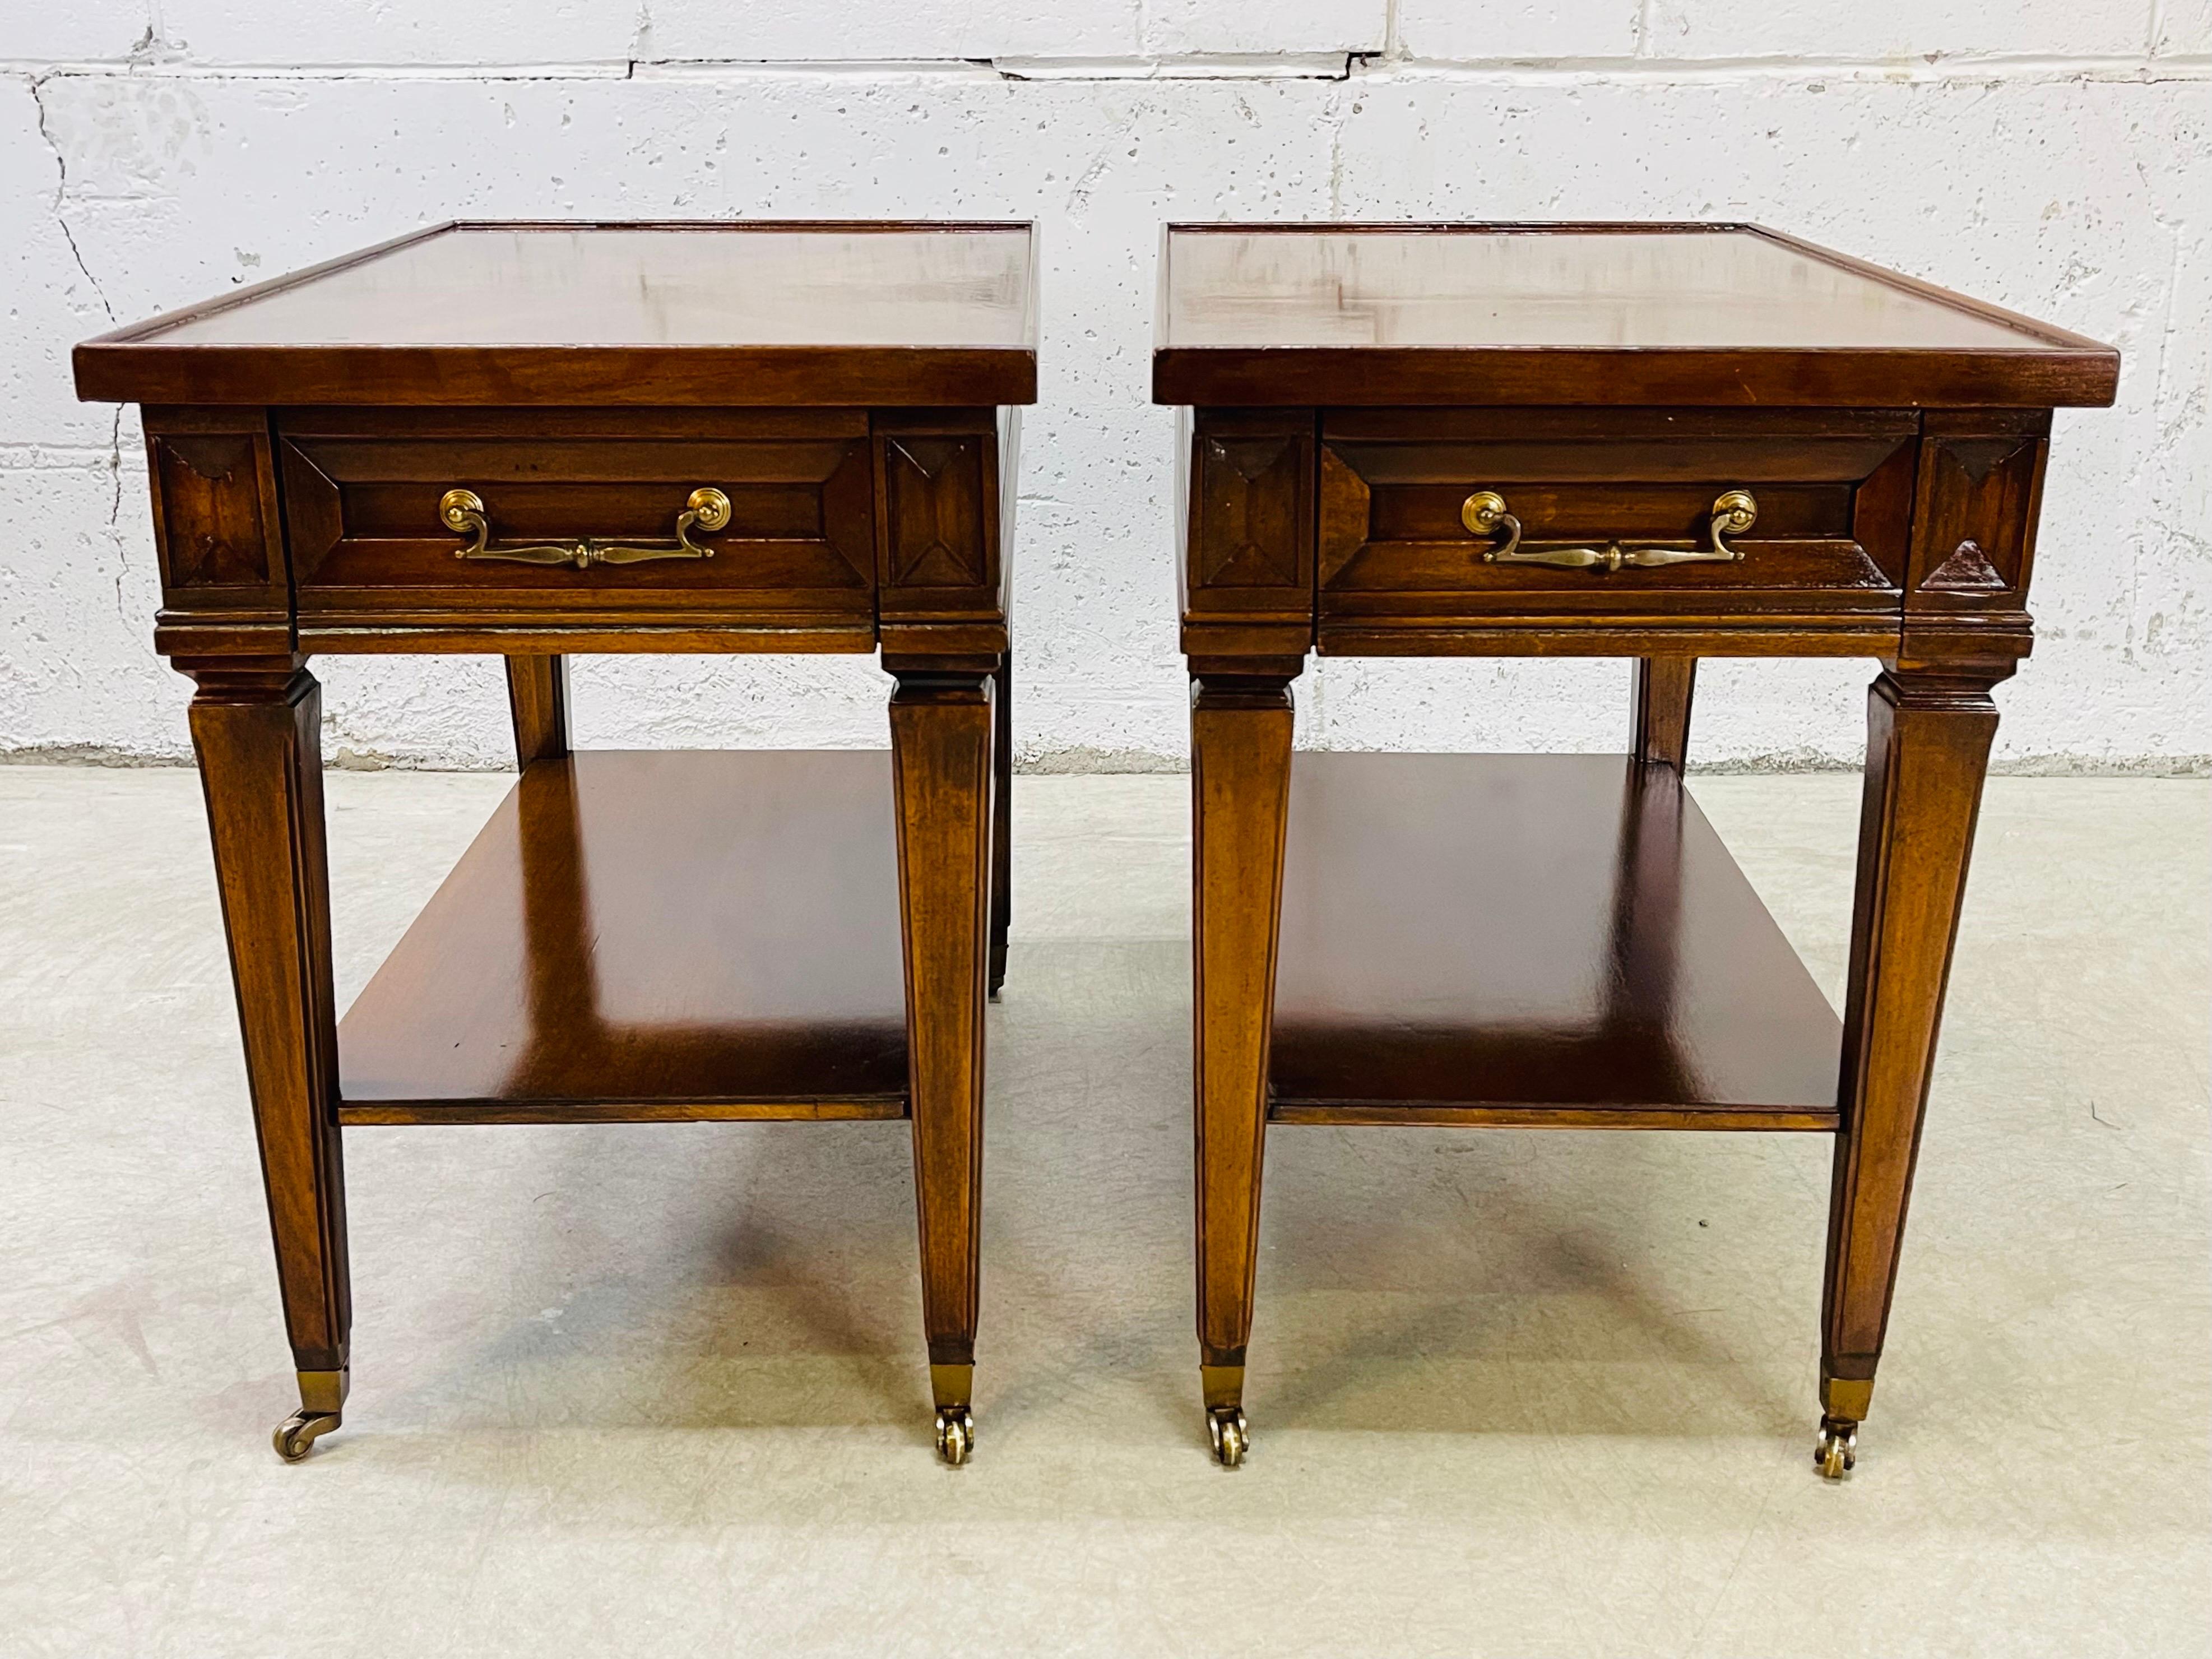 Vintage 1960s pair of mahogany wood side tables with a matchbook veneer top by Brandt Furniture Company. The tables have brass pulls and brass castors. The castors roll freely. Each table has a single drawer for storage and an additional shelf.